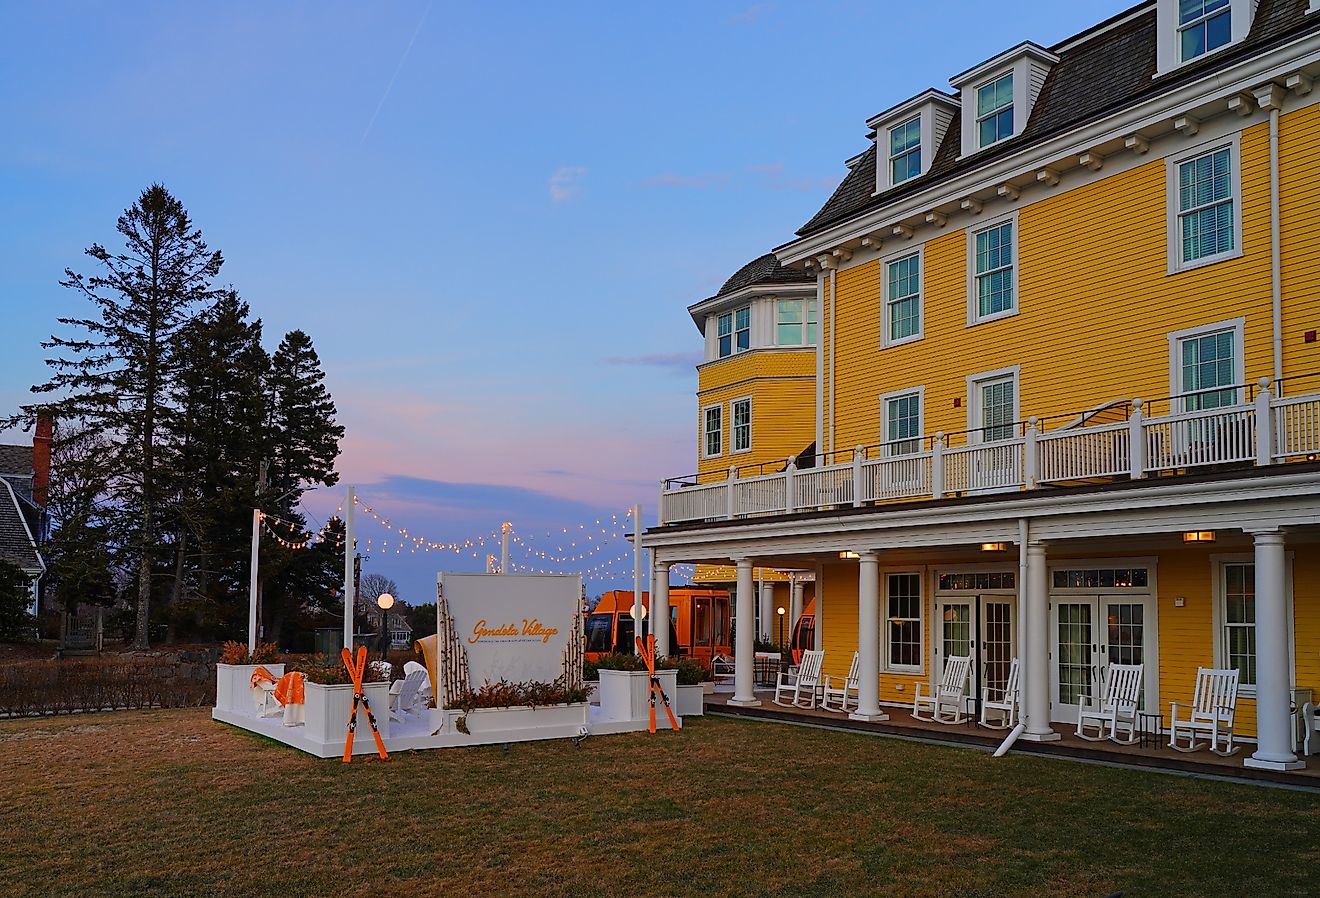 Ocean House, a landmark historic Relais et Chateaux resort hotel in Watch Hill, Westerly, Rhode Island.